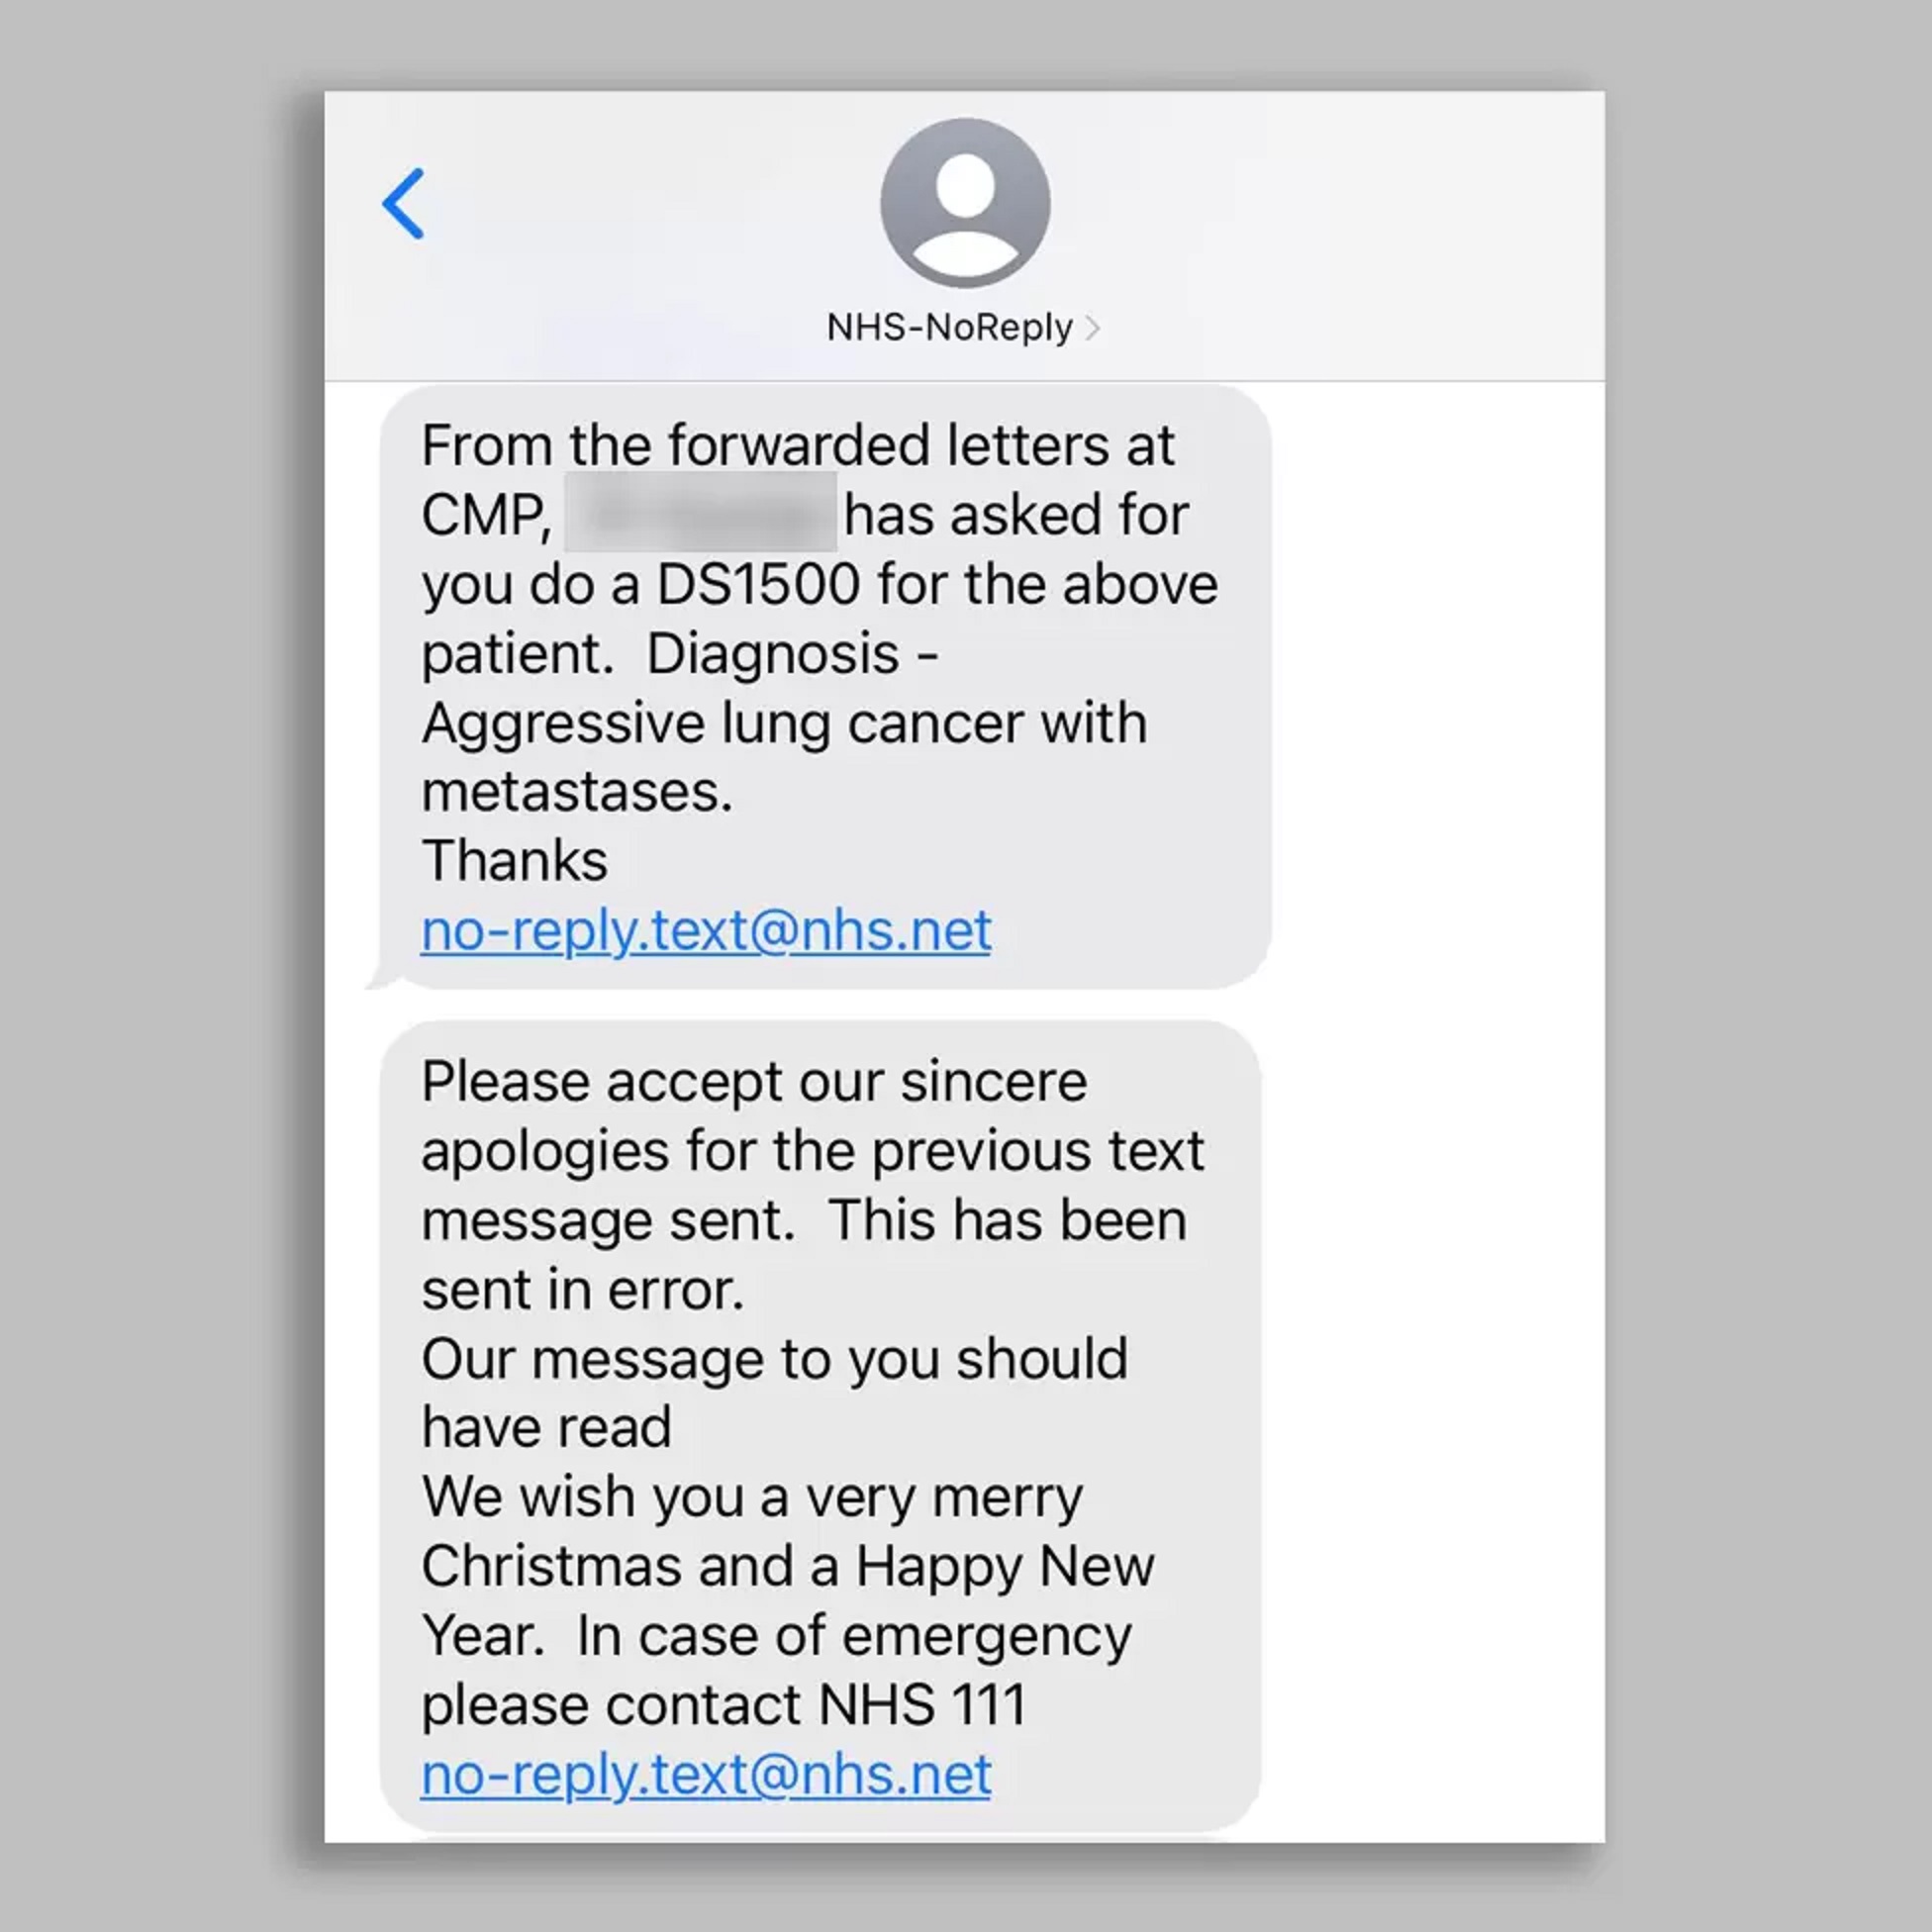 Surgeons Sorry for Texting Patients They Had 'Aggressive' Cancer Instead of 'Happy New Year'